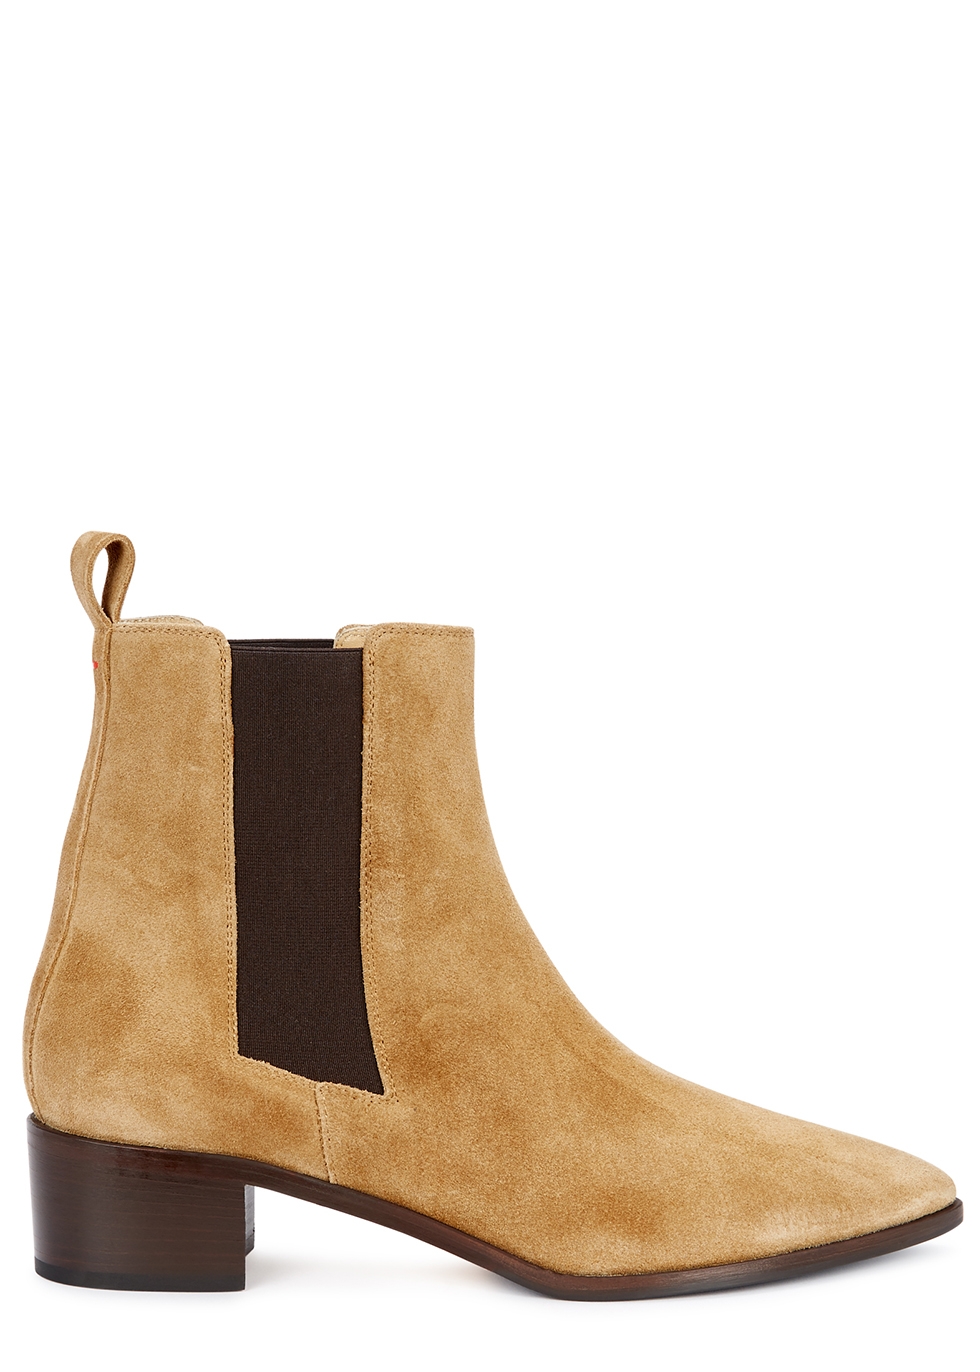 aeyde Lou 40 sand suede Chelsea boots 